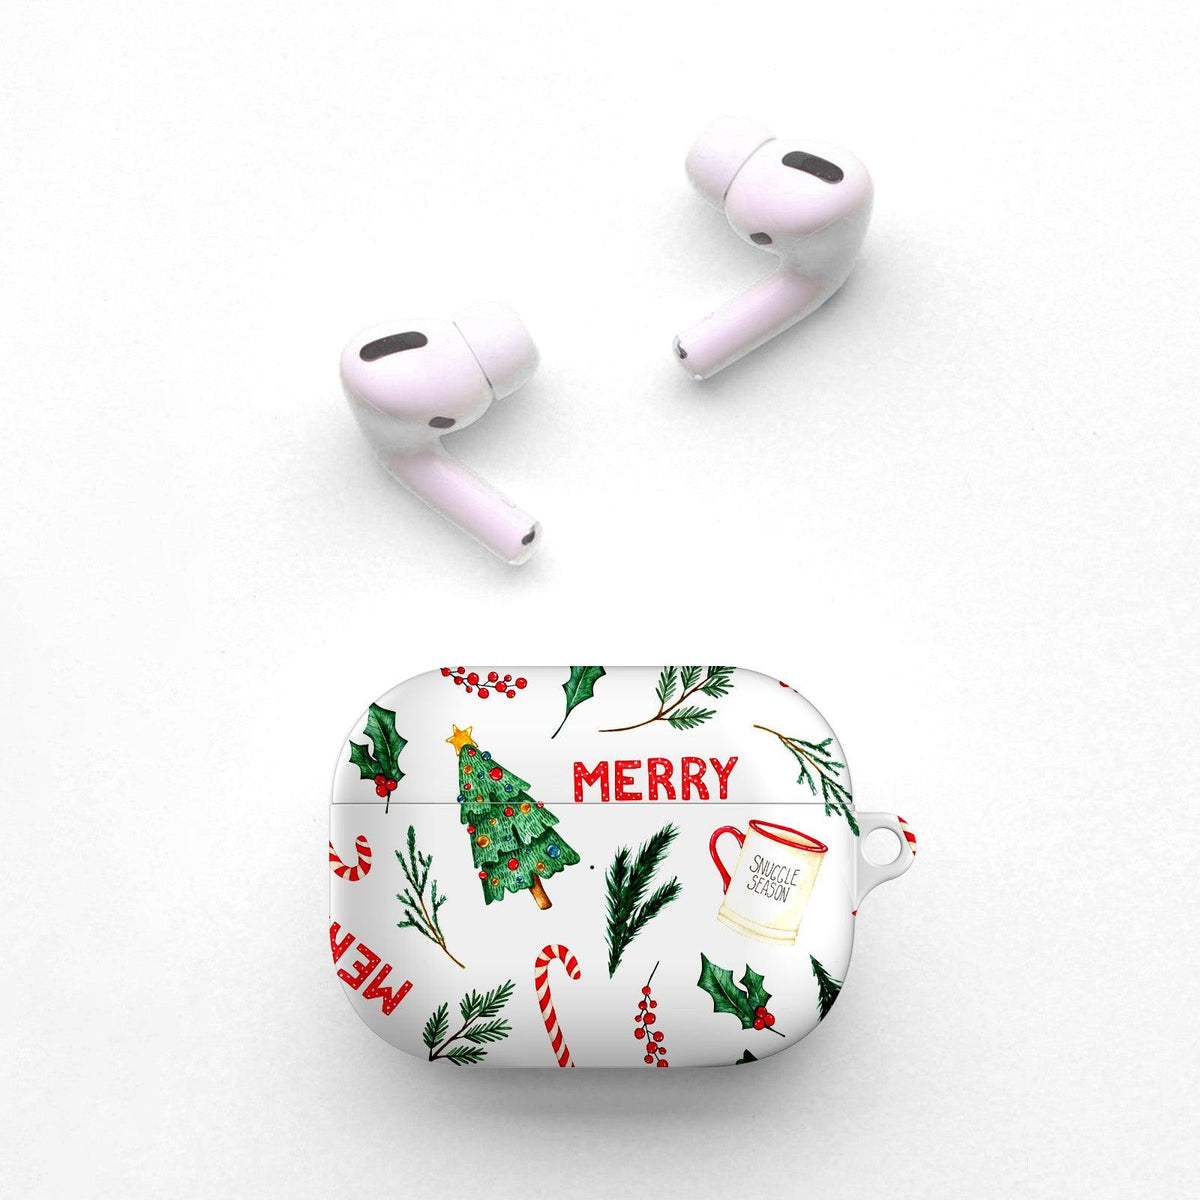 Why Personalized AirPods Cases Make the Perfect Gift